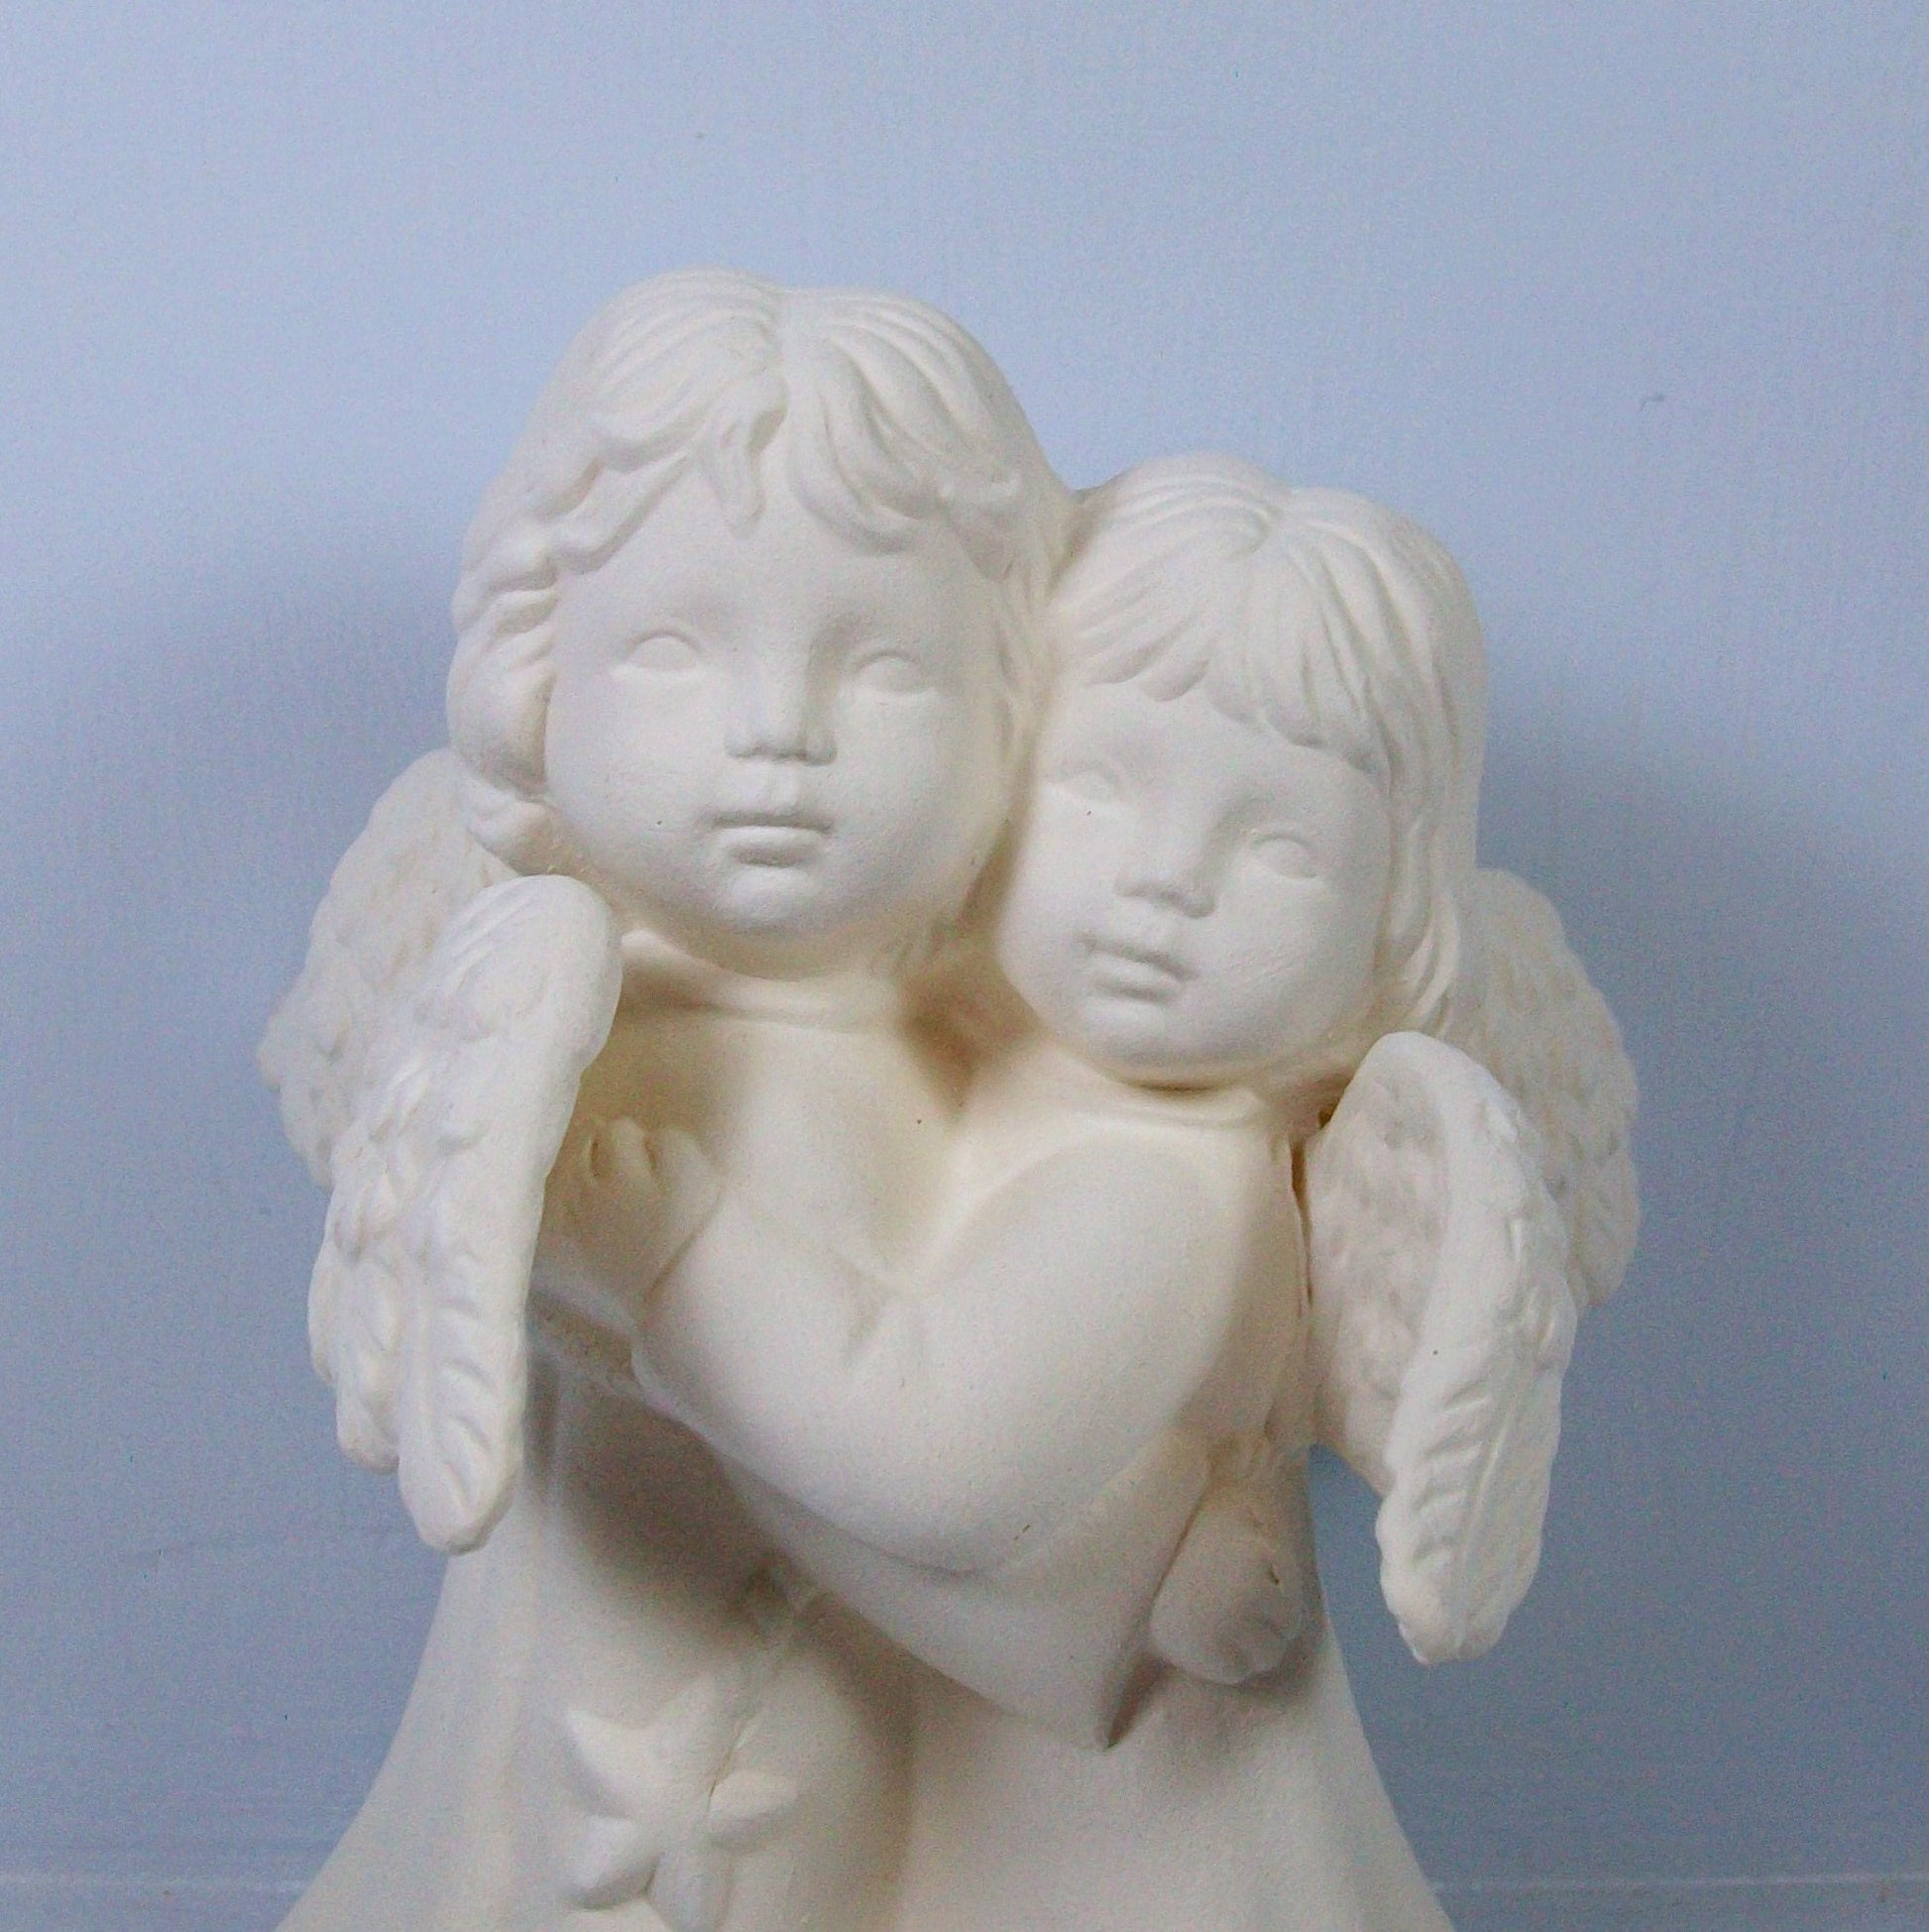 Close up showing faces of unpainted ceramic hugging angel statue